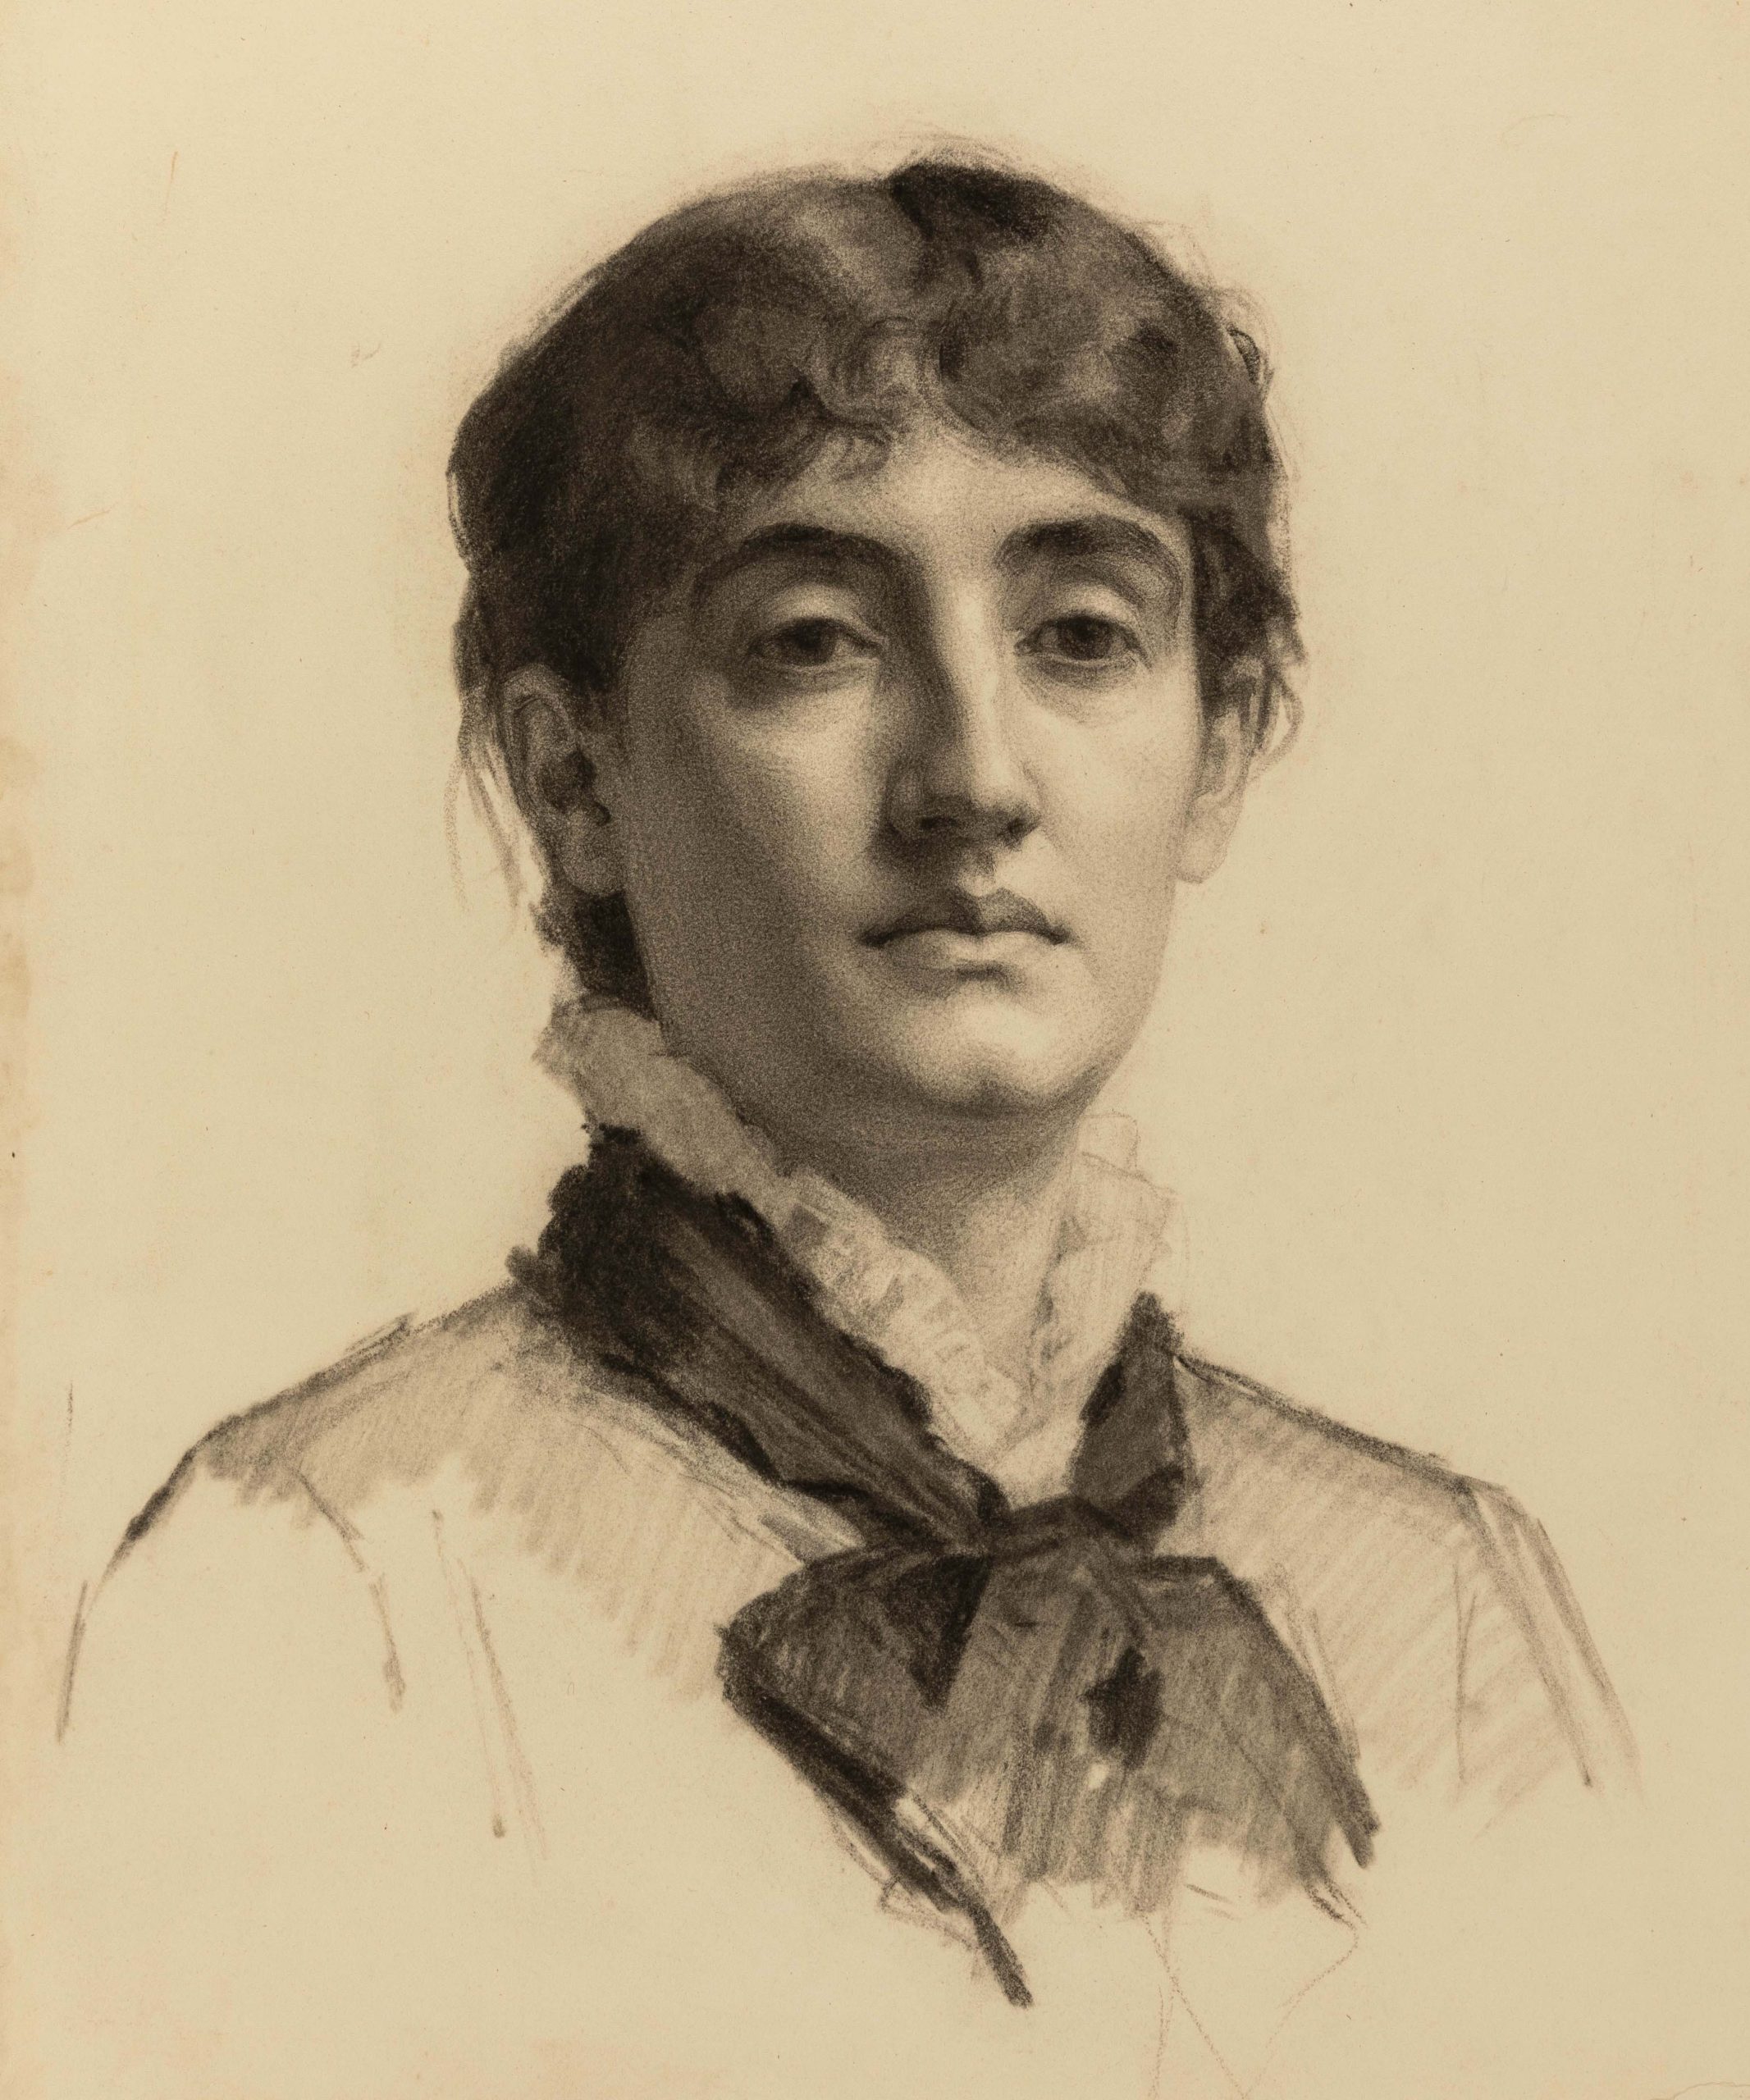 Bust-length portrait of a woman, facing front 